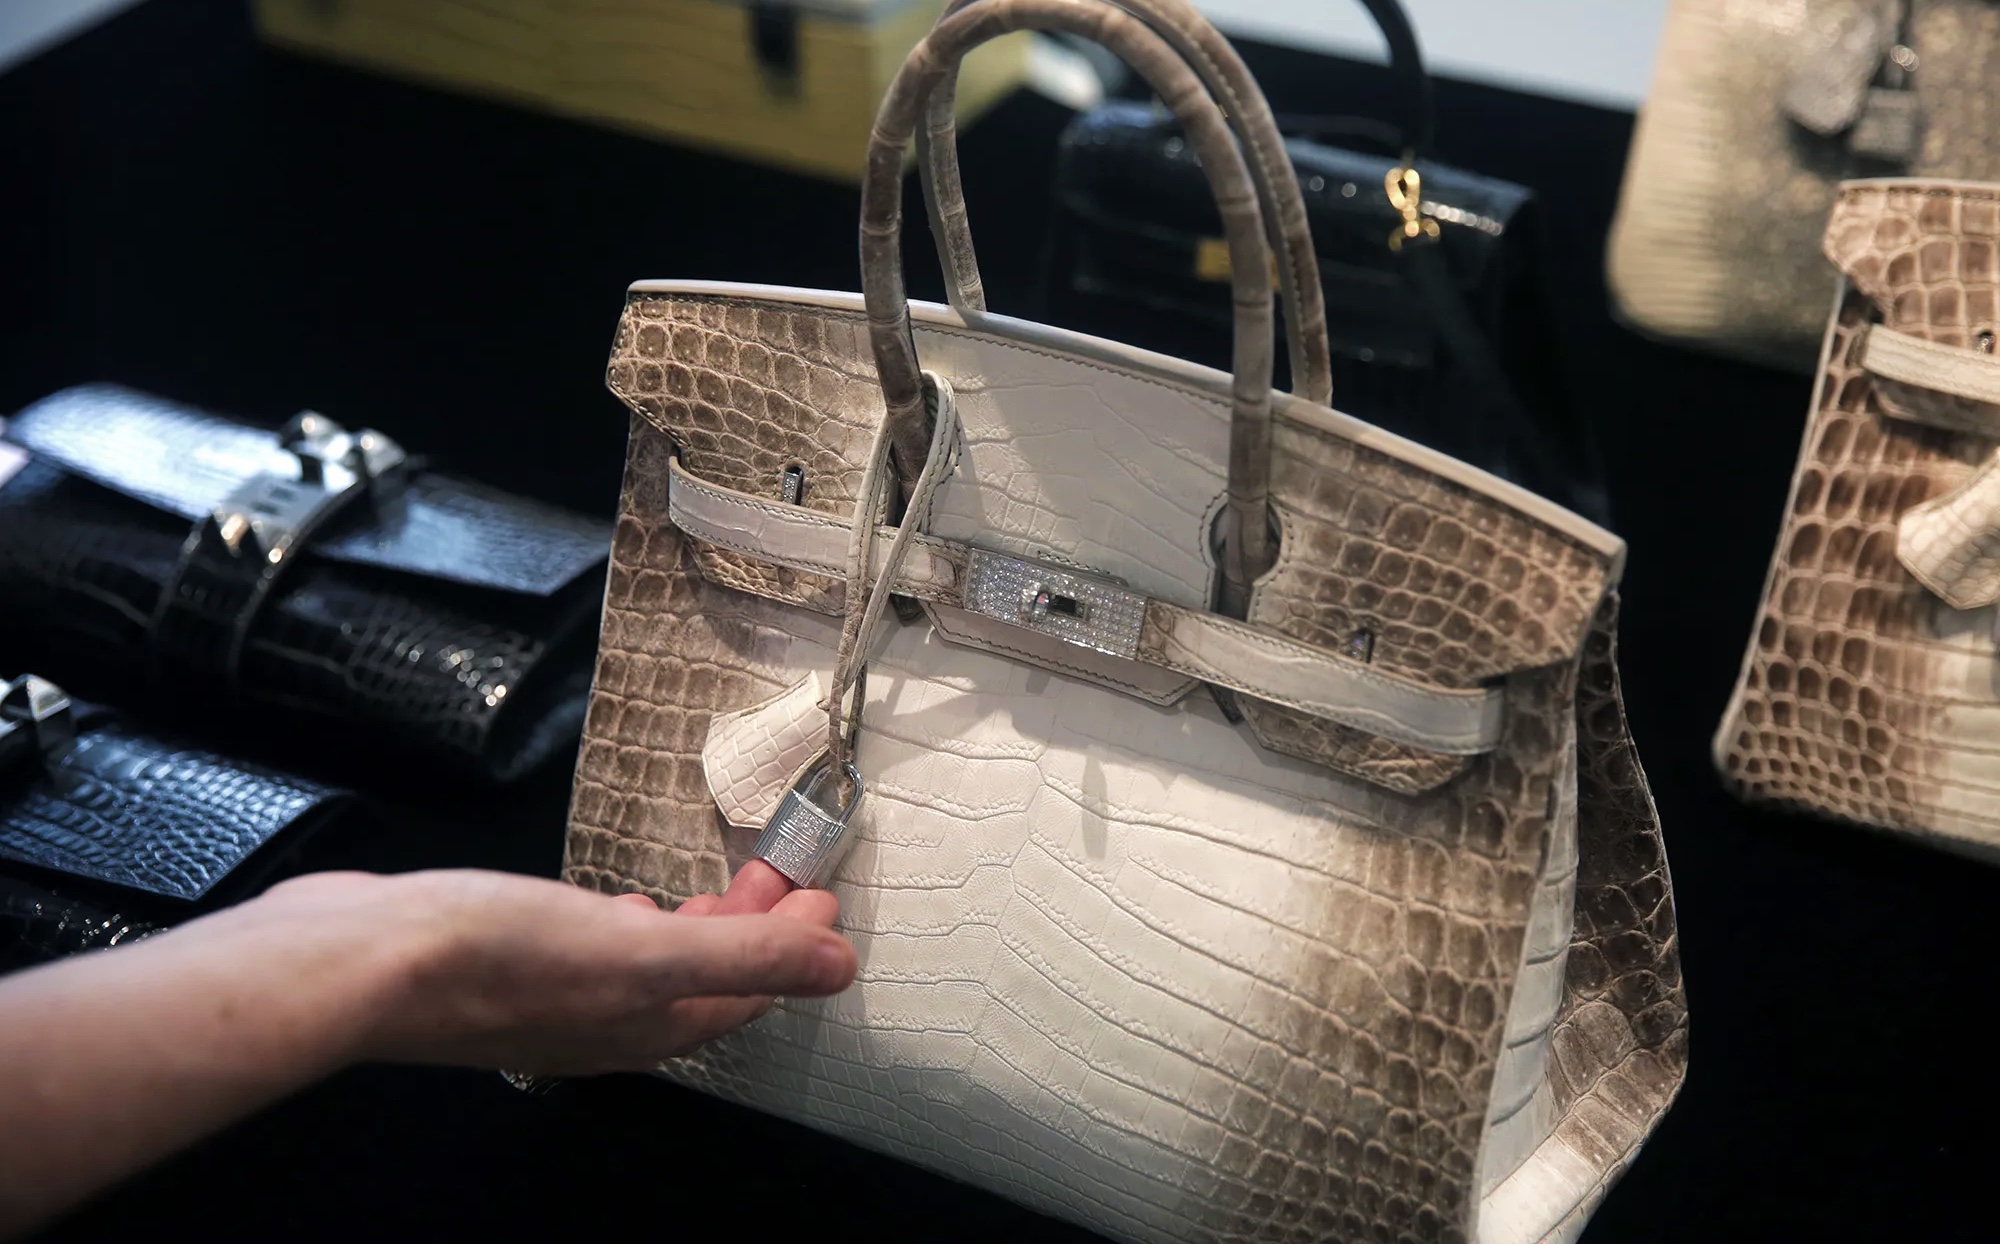 The Rarity And Exclusivity Of The Iconic Hermes Himalayan Birkin